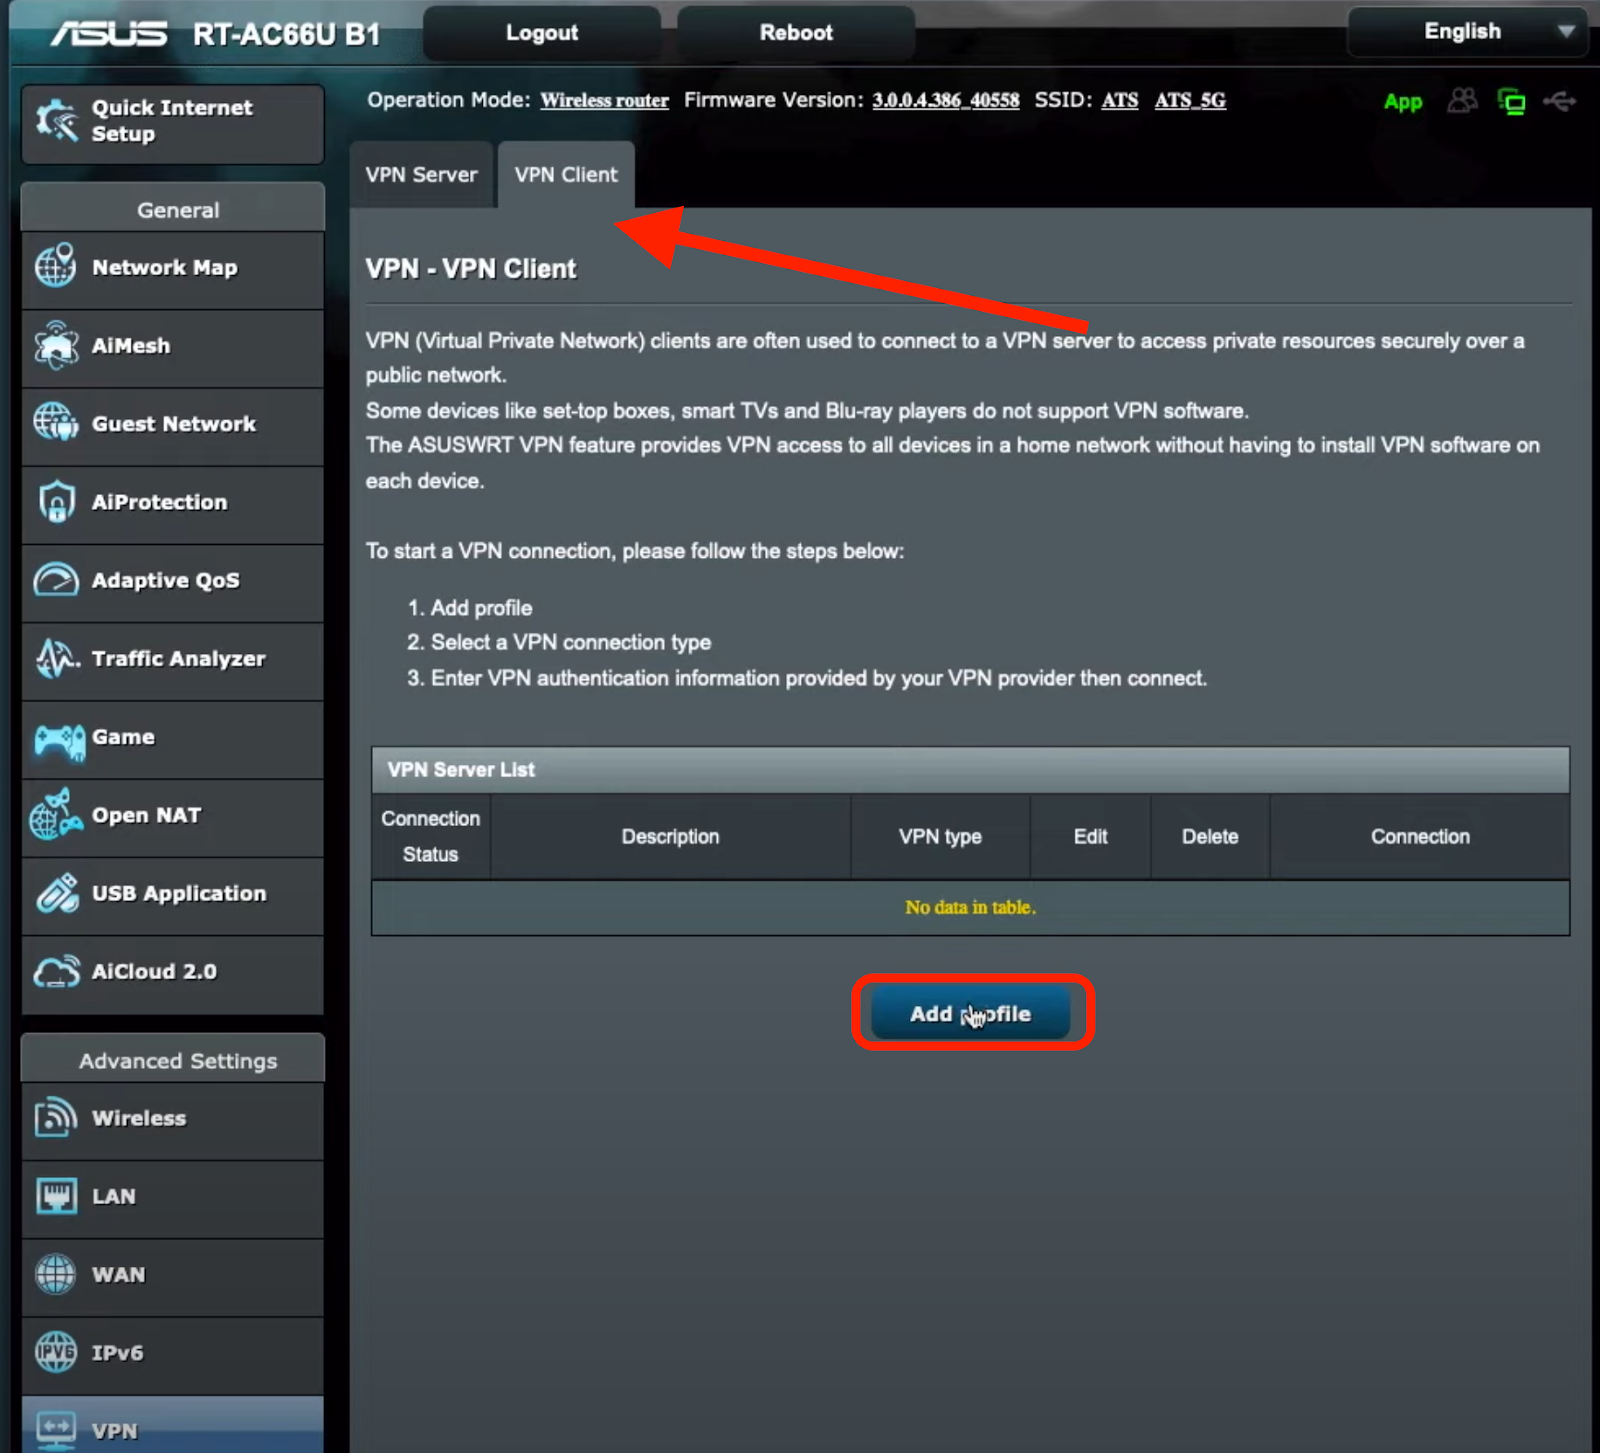 Screenshot of Asus Wi-Fi router VPN client settings page